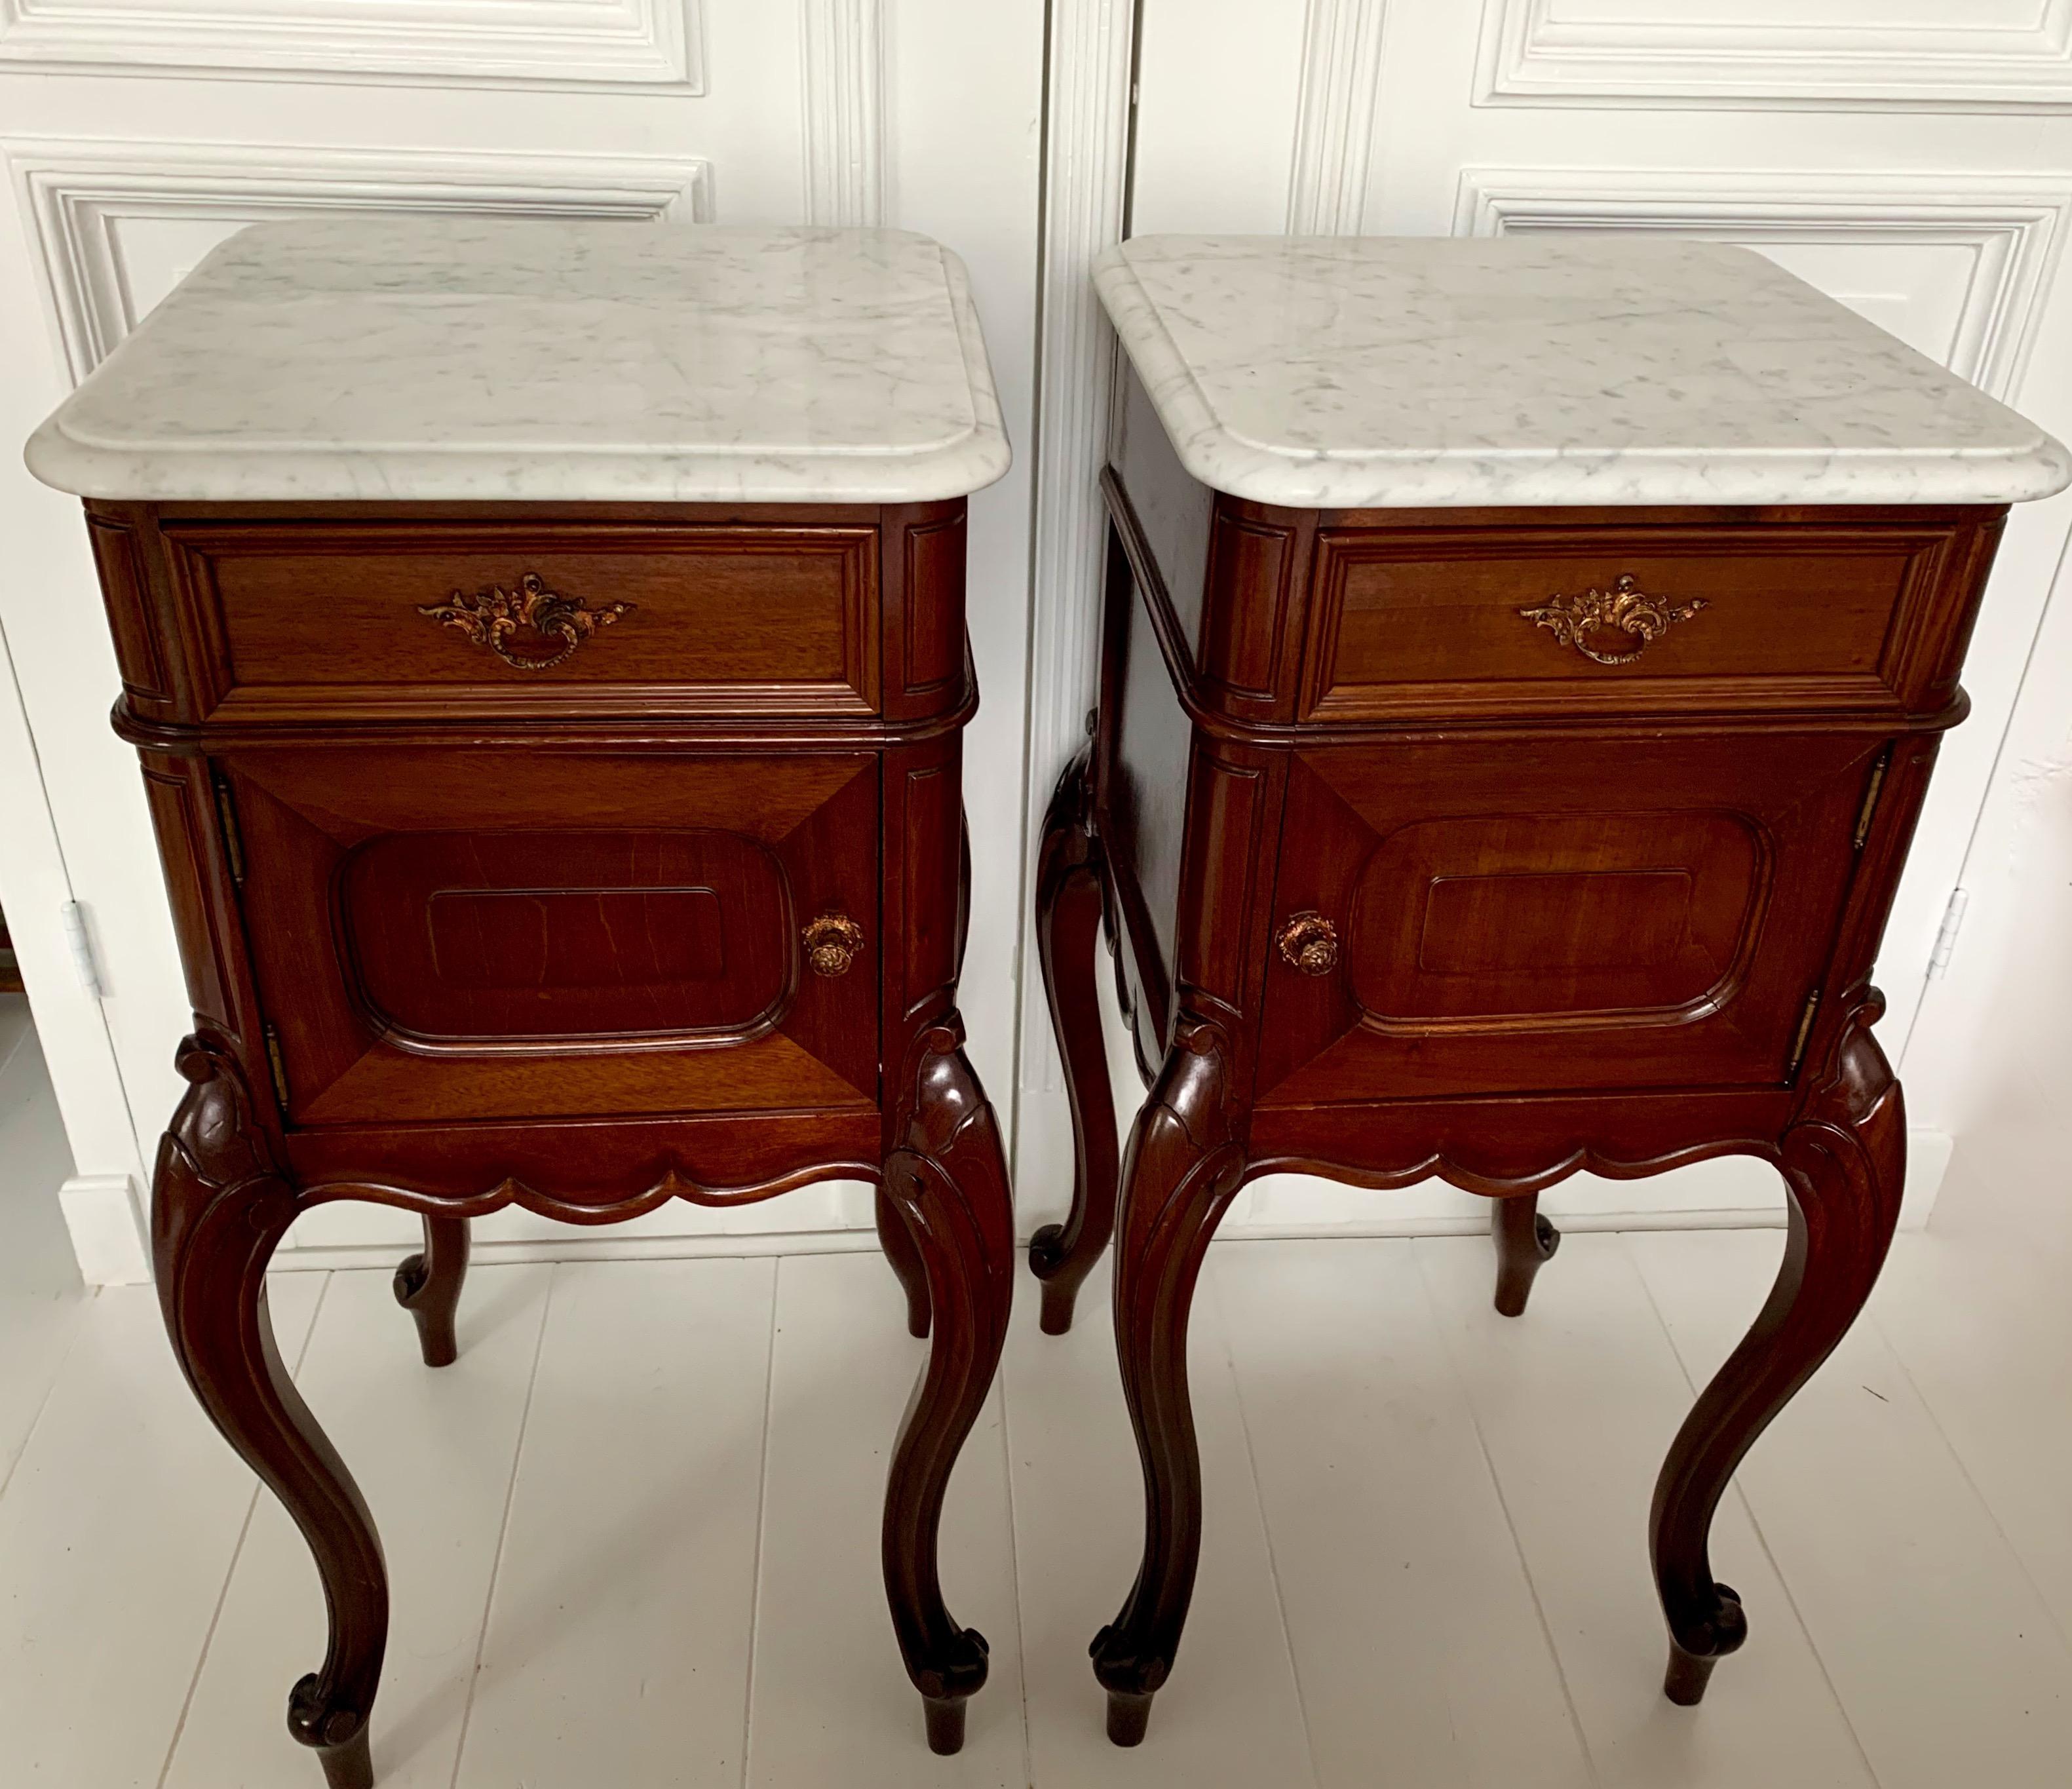 Stunning pair of early 20th century, handcrafted, wooden bedside cabinets.

If you have an eye for detail, good shapes and top of the line furniture than you know how hard it is to find anything half decent in furniture stores of today. Having a